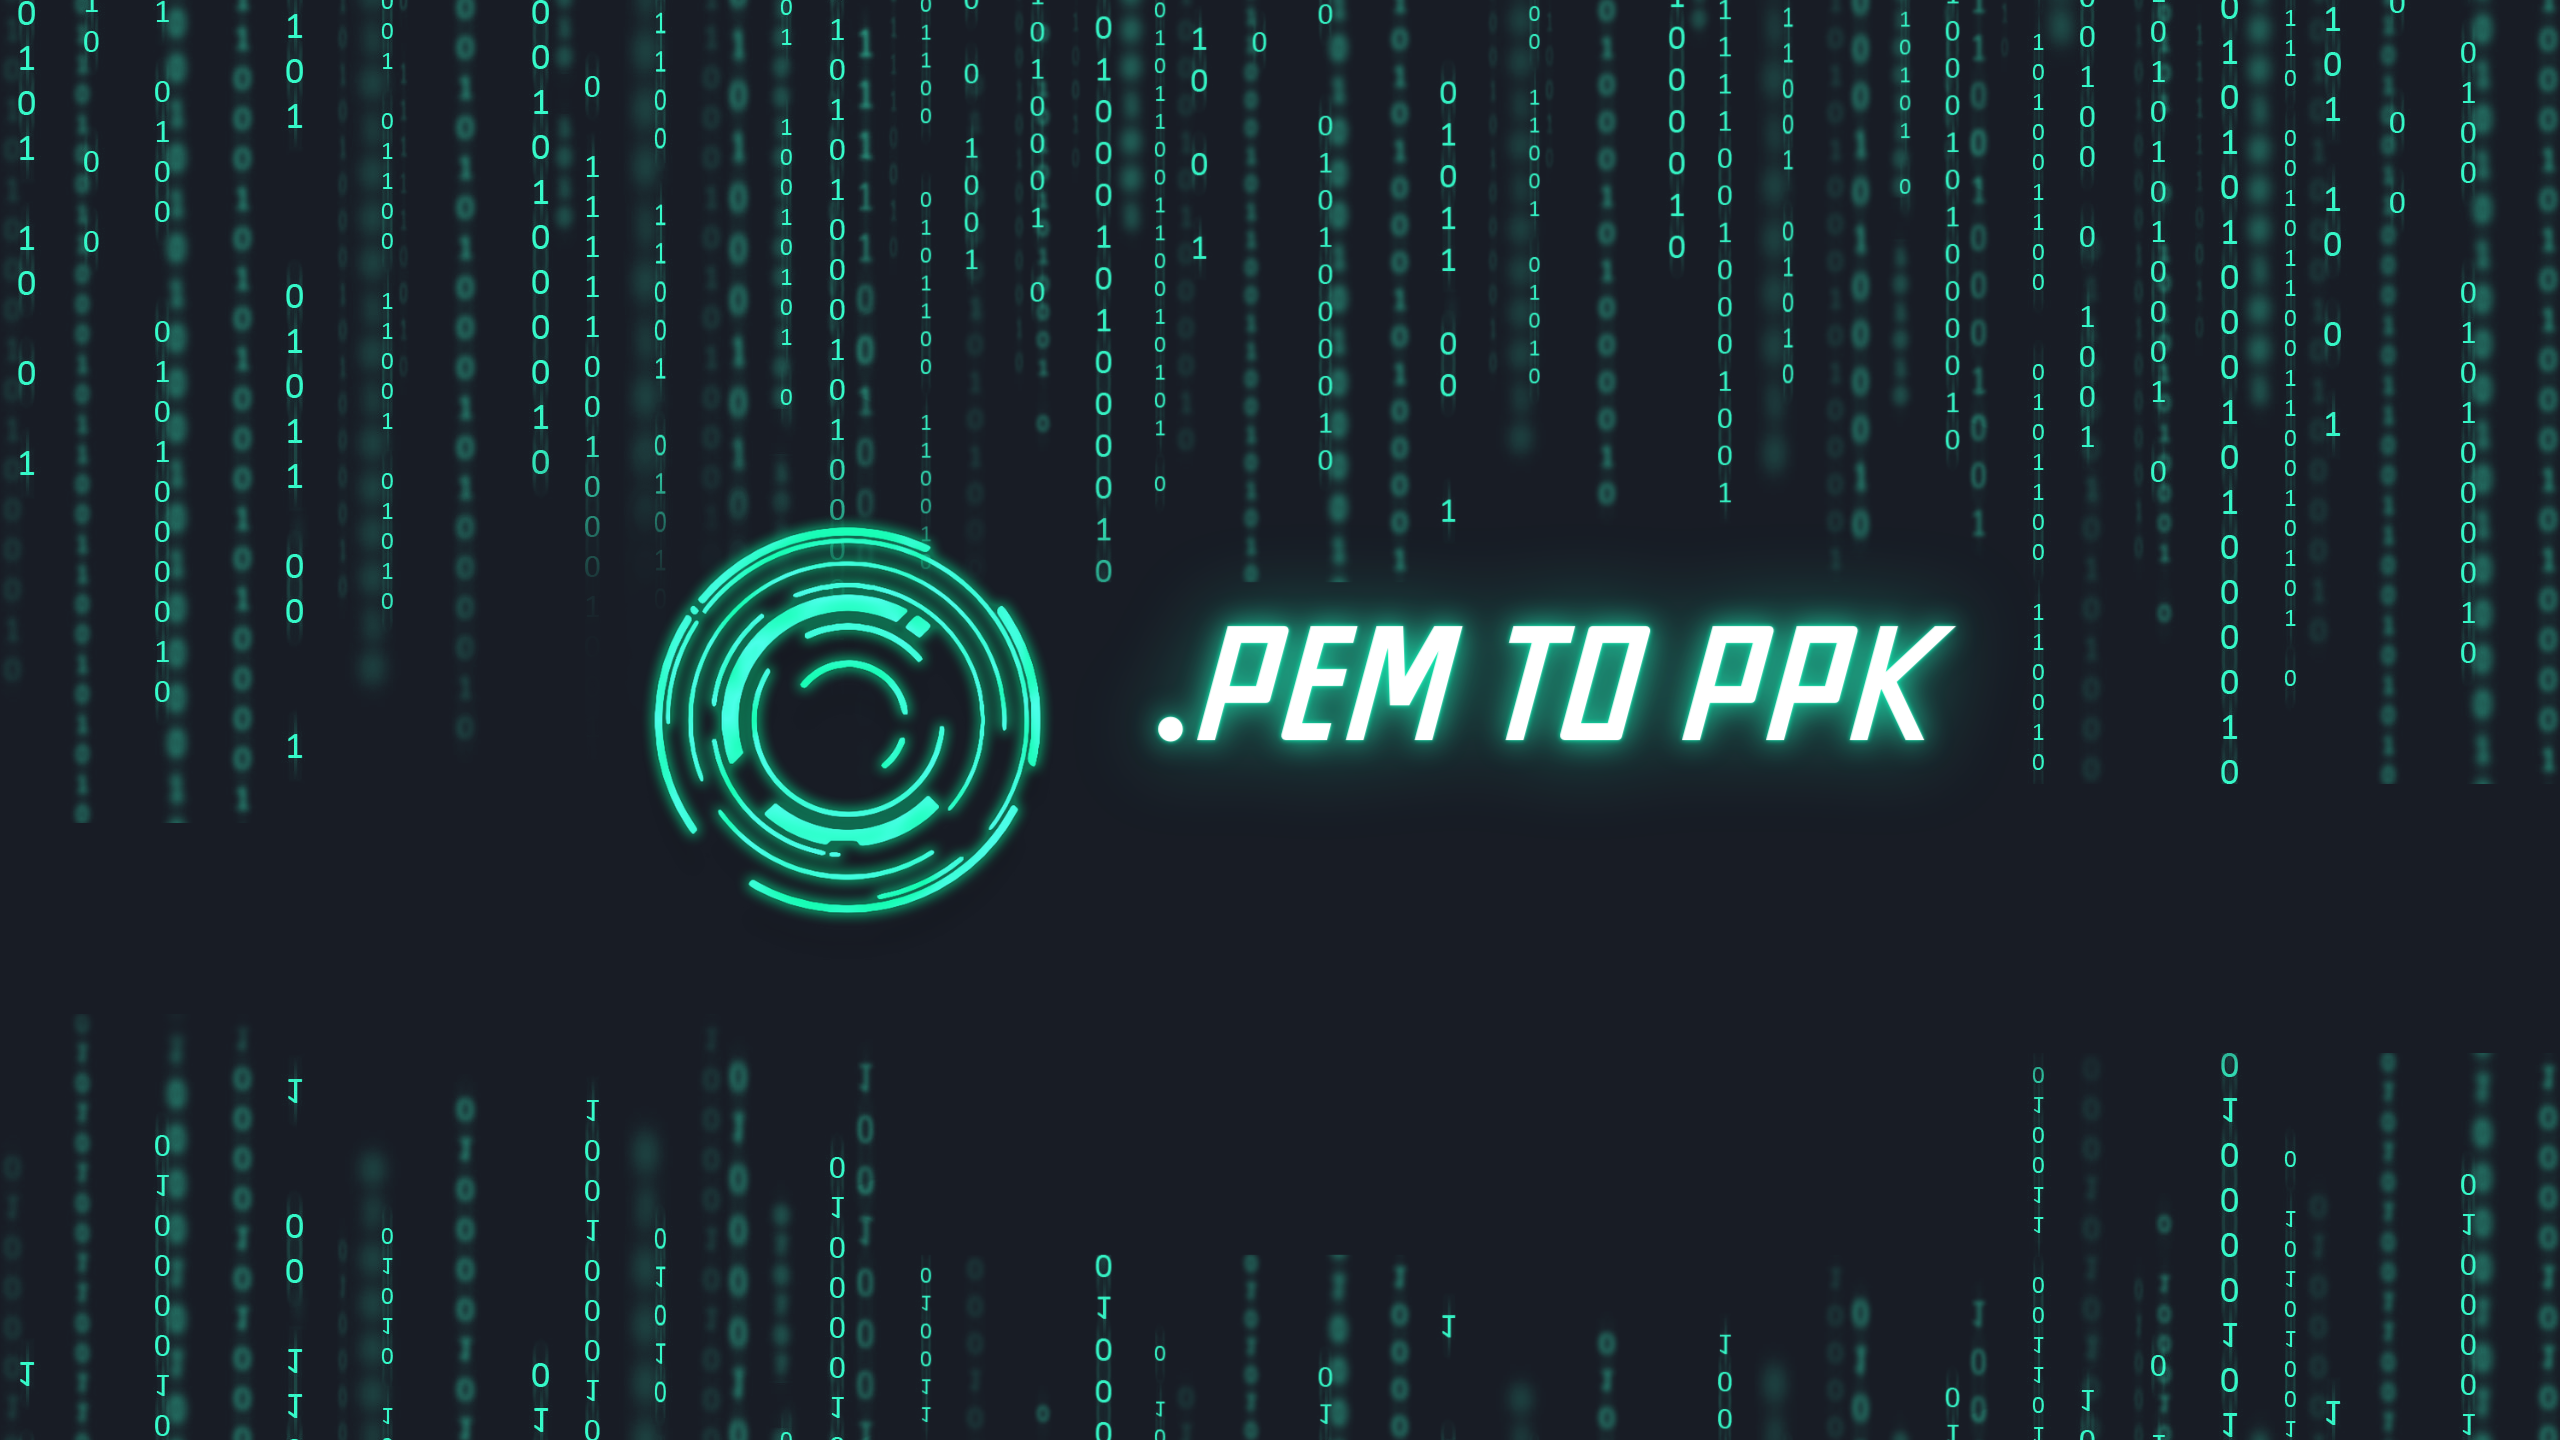 How to Convert .pem File to .ppk Format